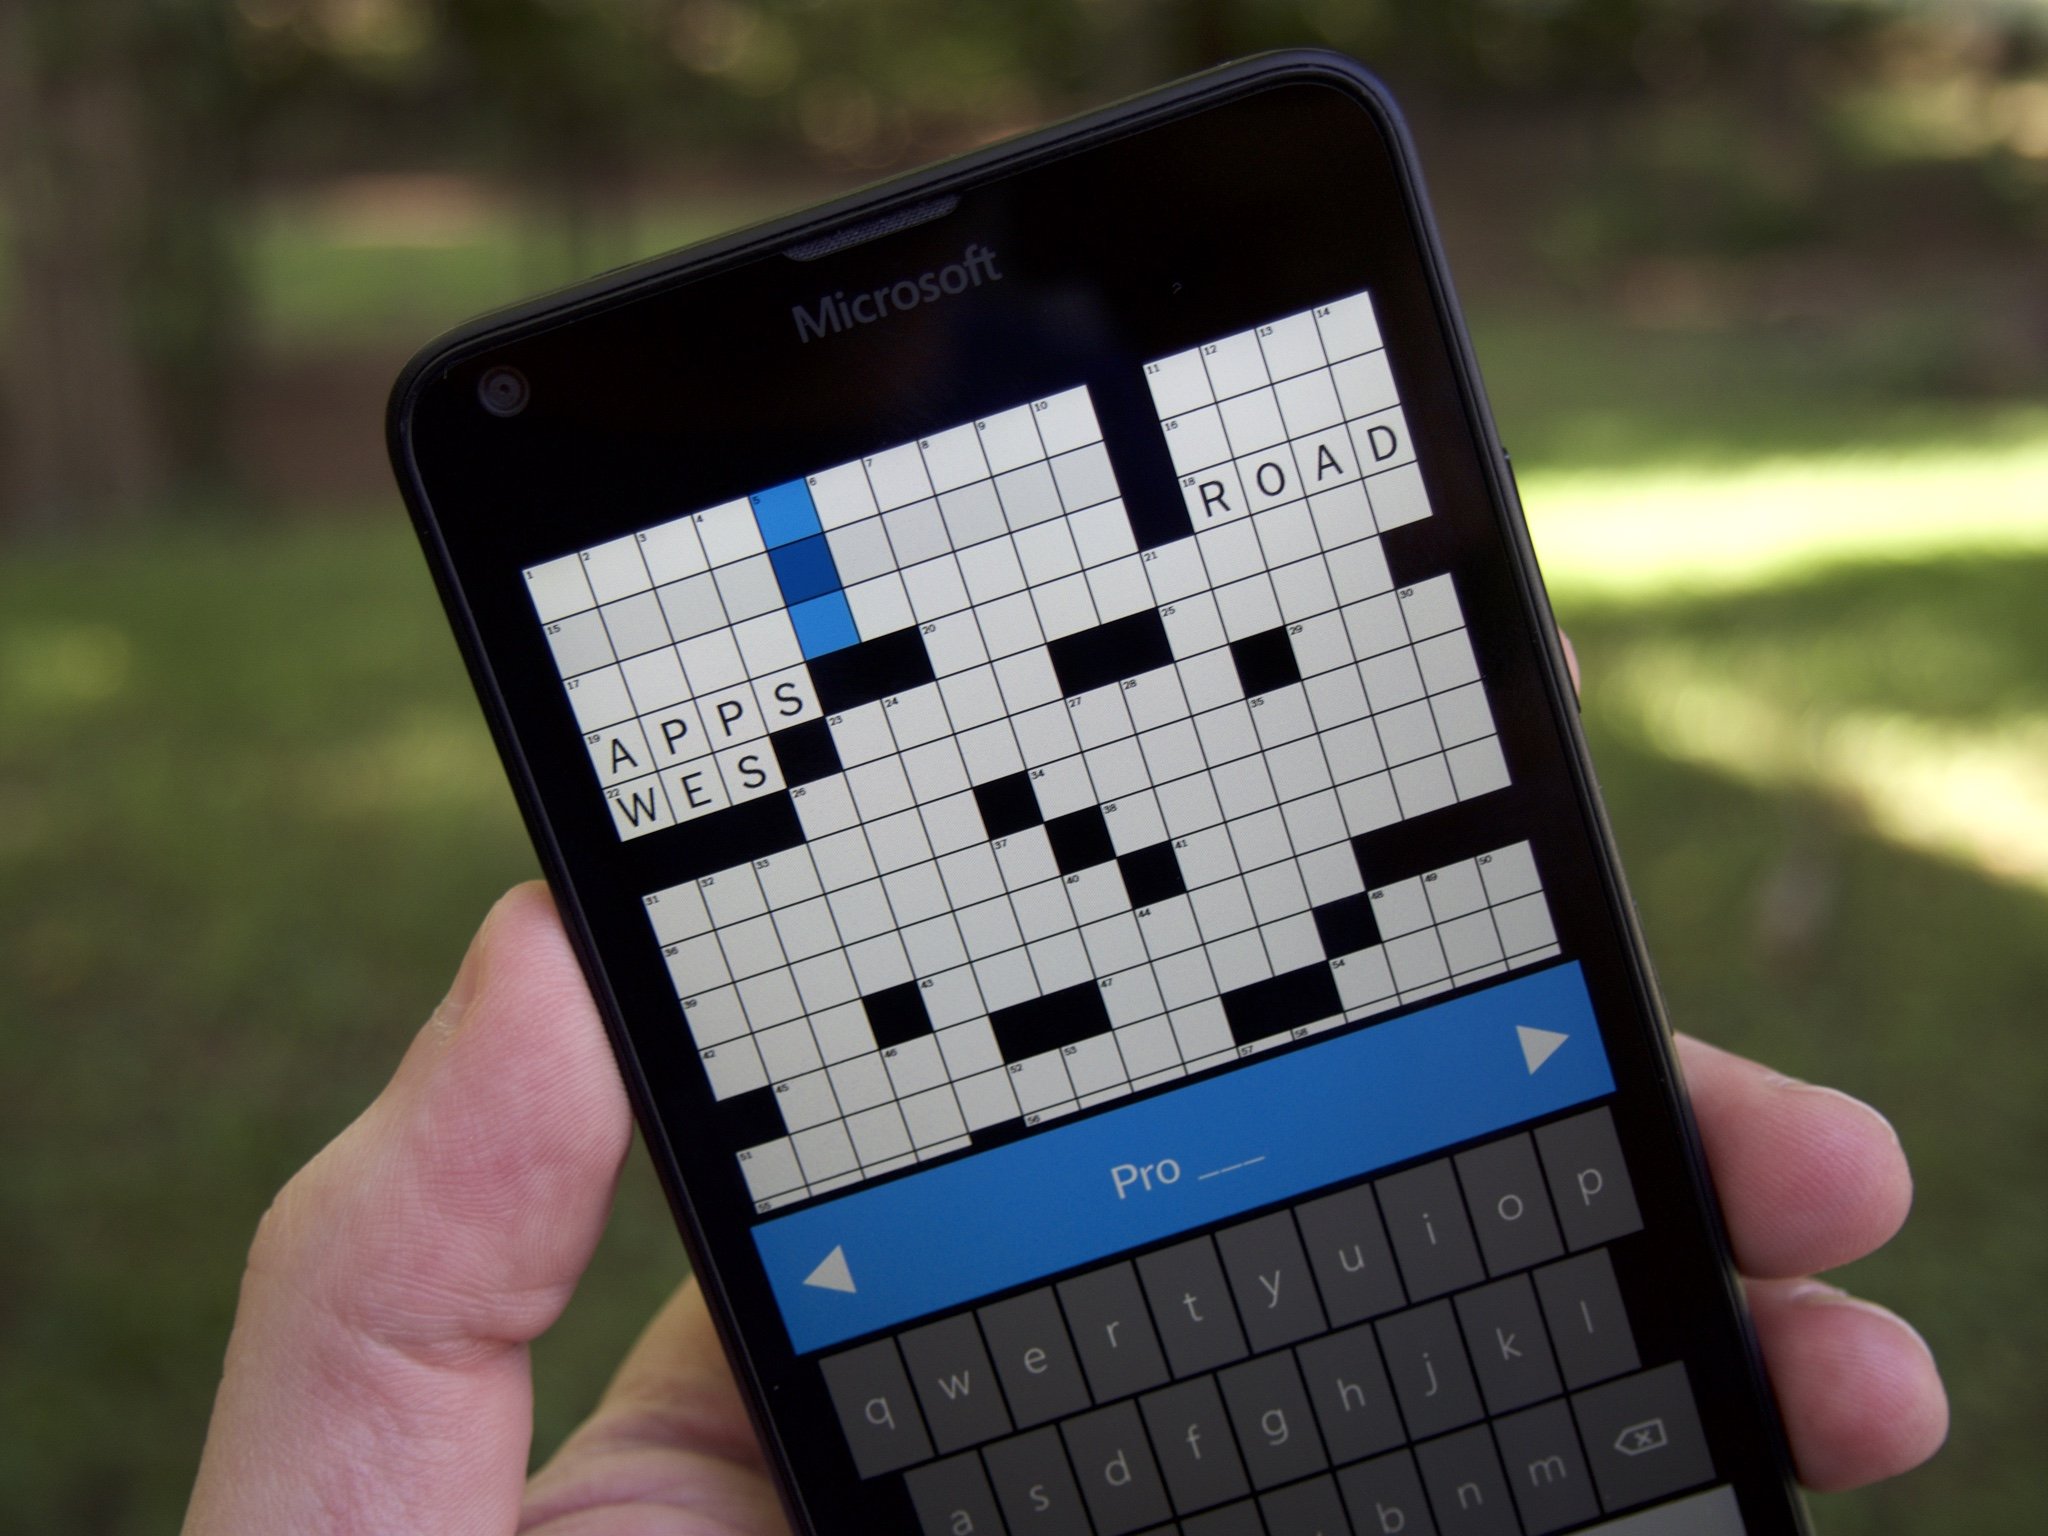 The New York Times Crossword app gets rebuild for Windows 10